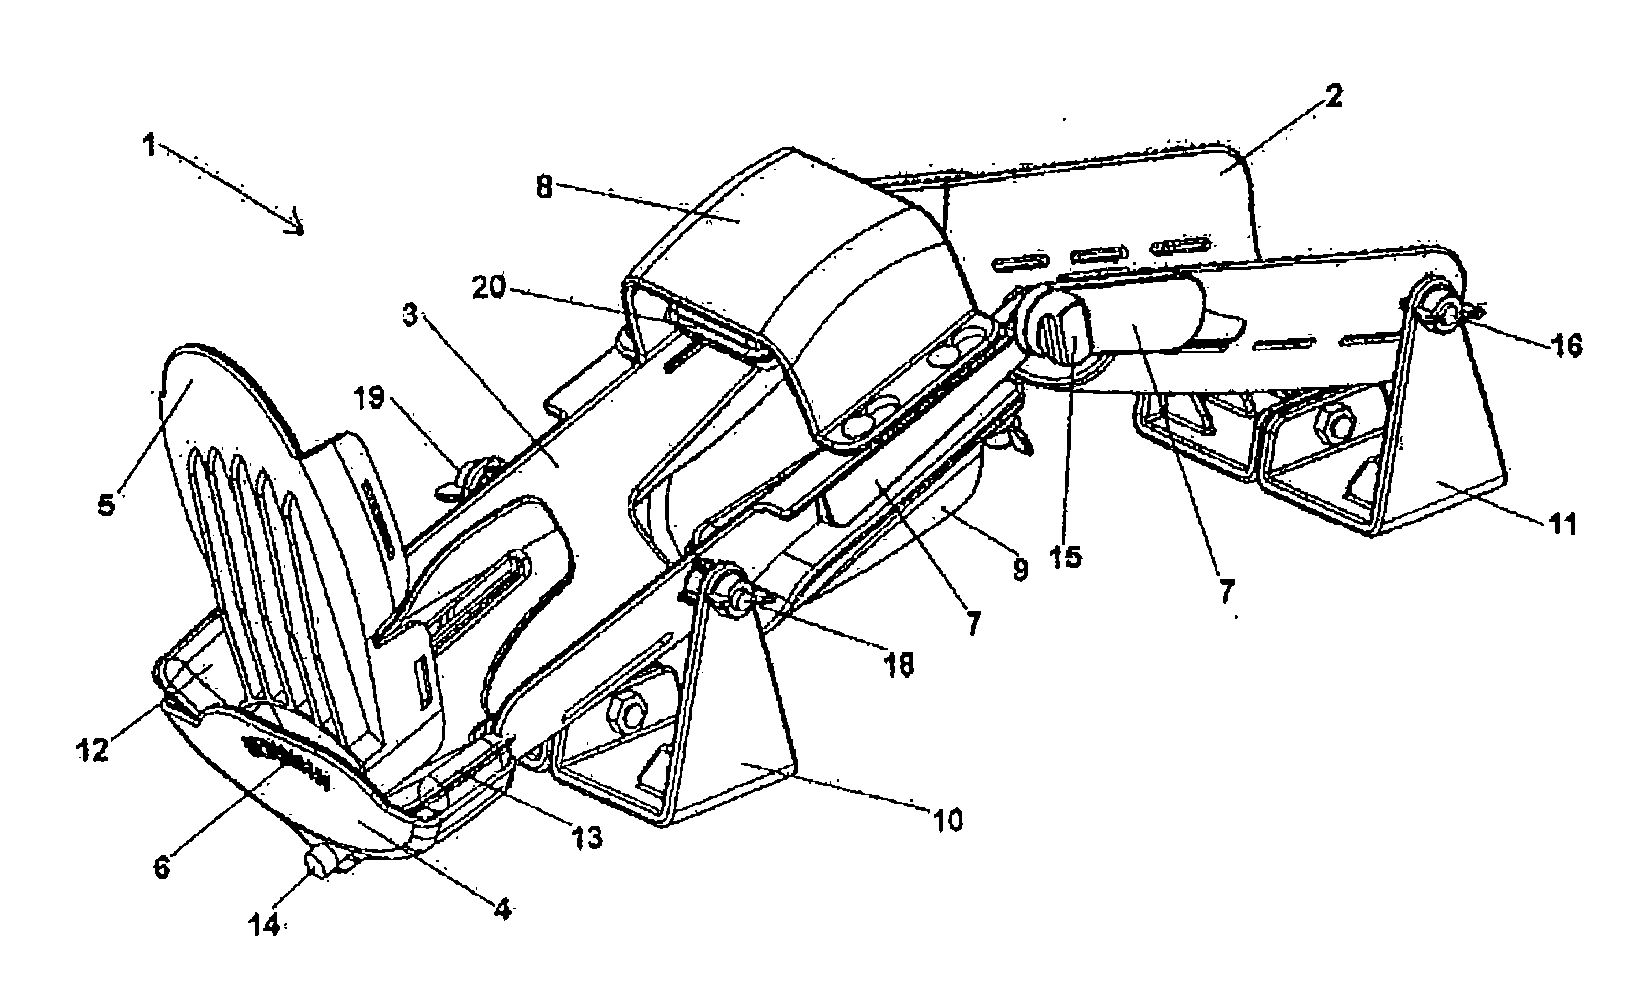 Device for measuring knee laxity